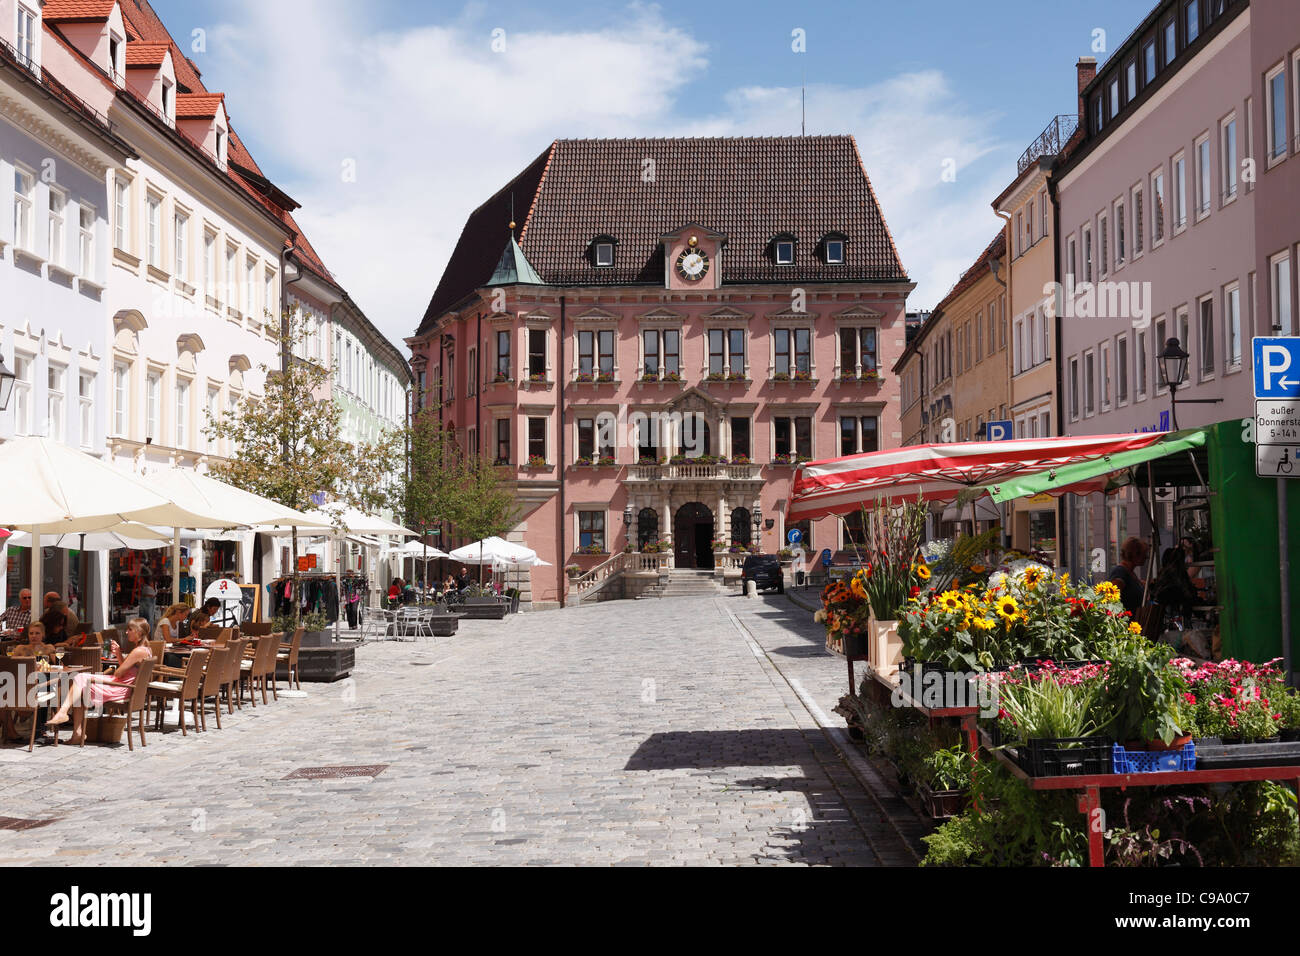 Germany, Bavaria, Swabia, Kaufbeuren, View of city hall with restaurant and flower shop Stock Photo